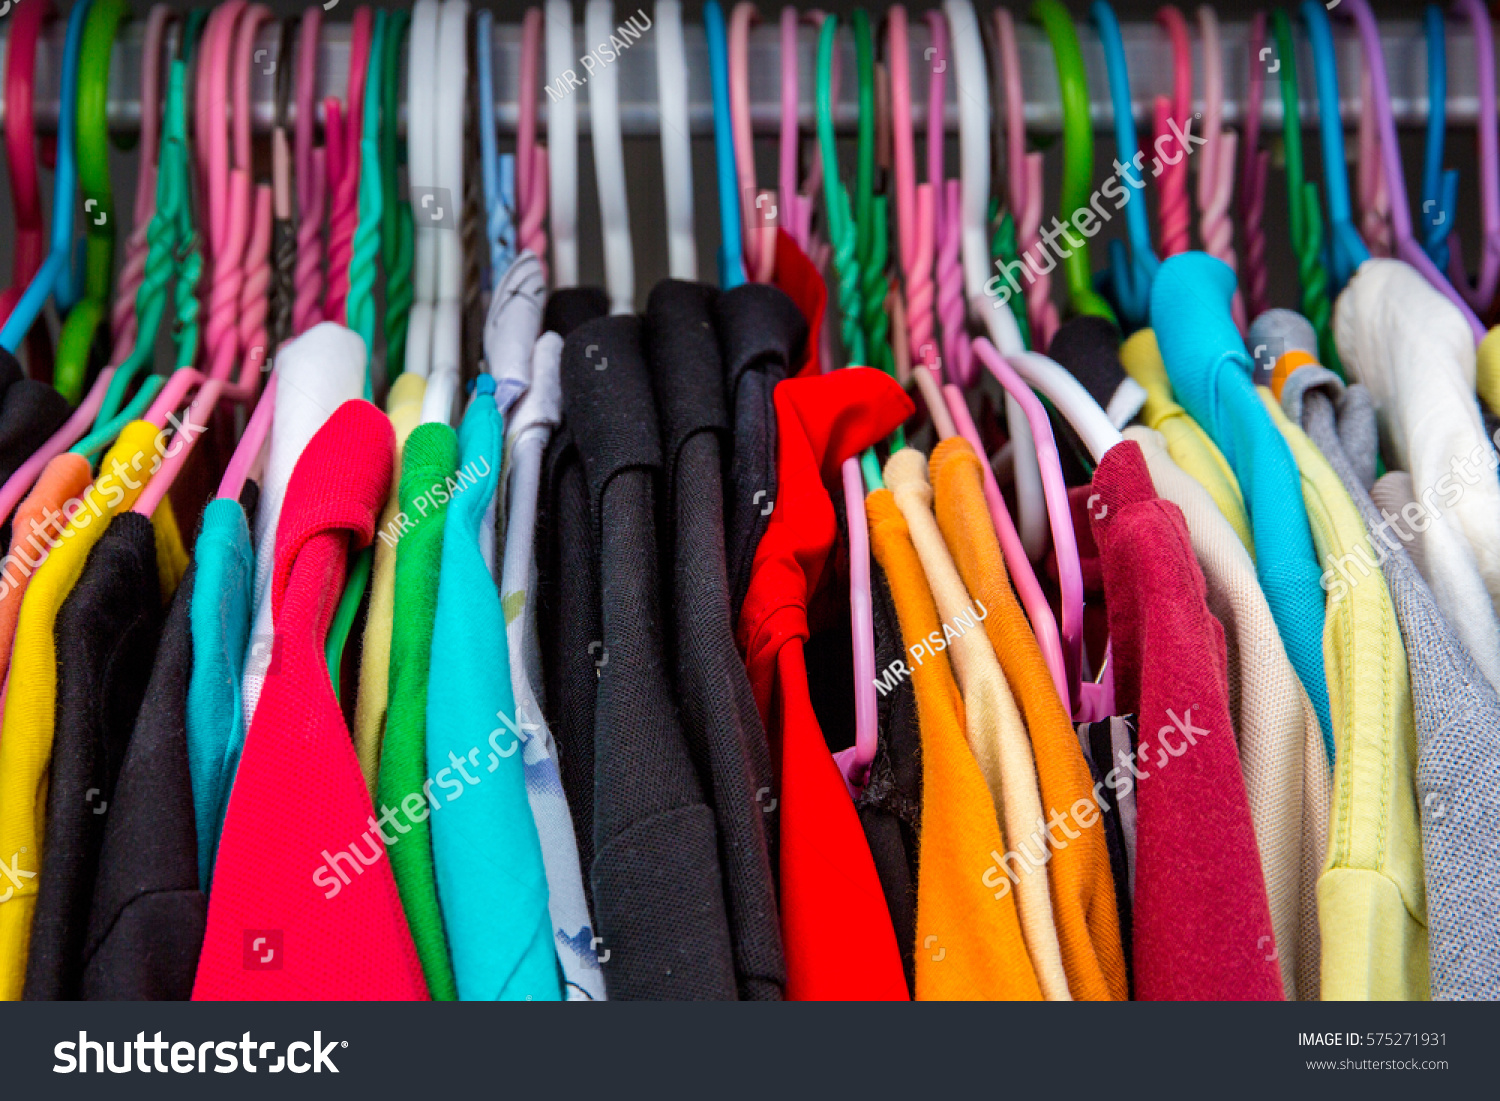 clipart of clothes hanging in a closet - photo #47